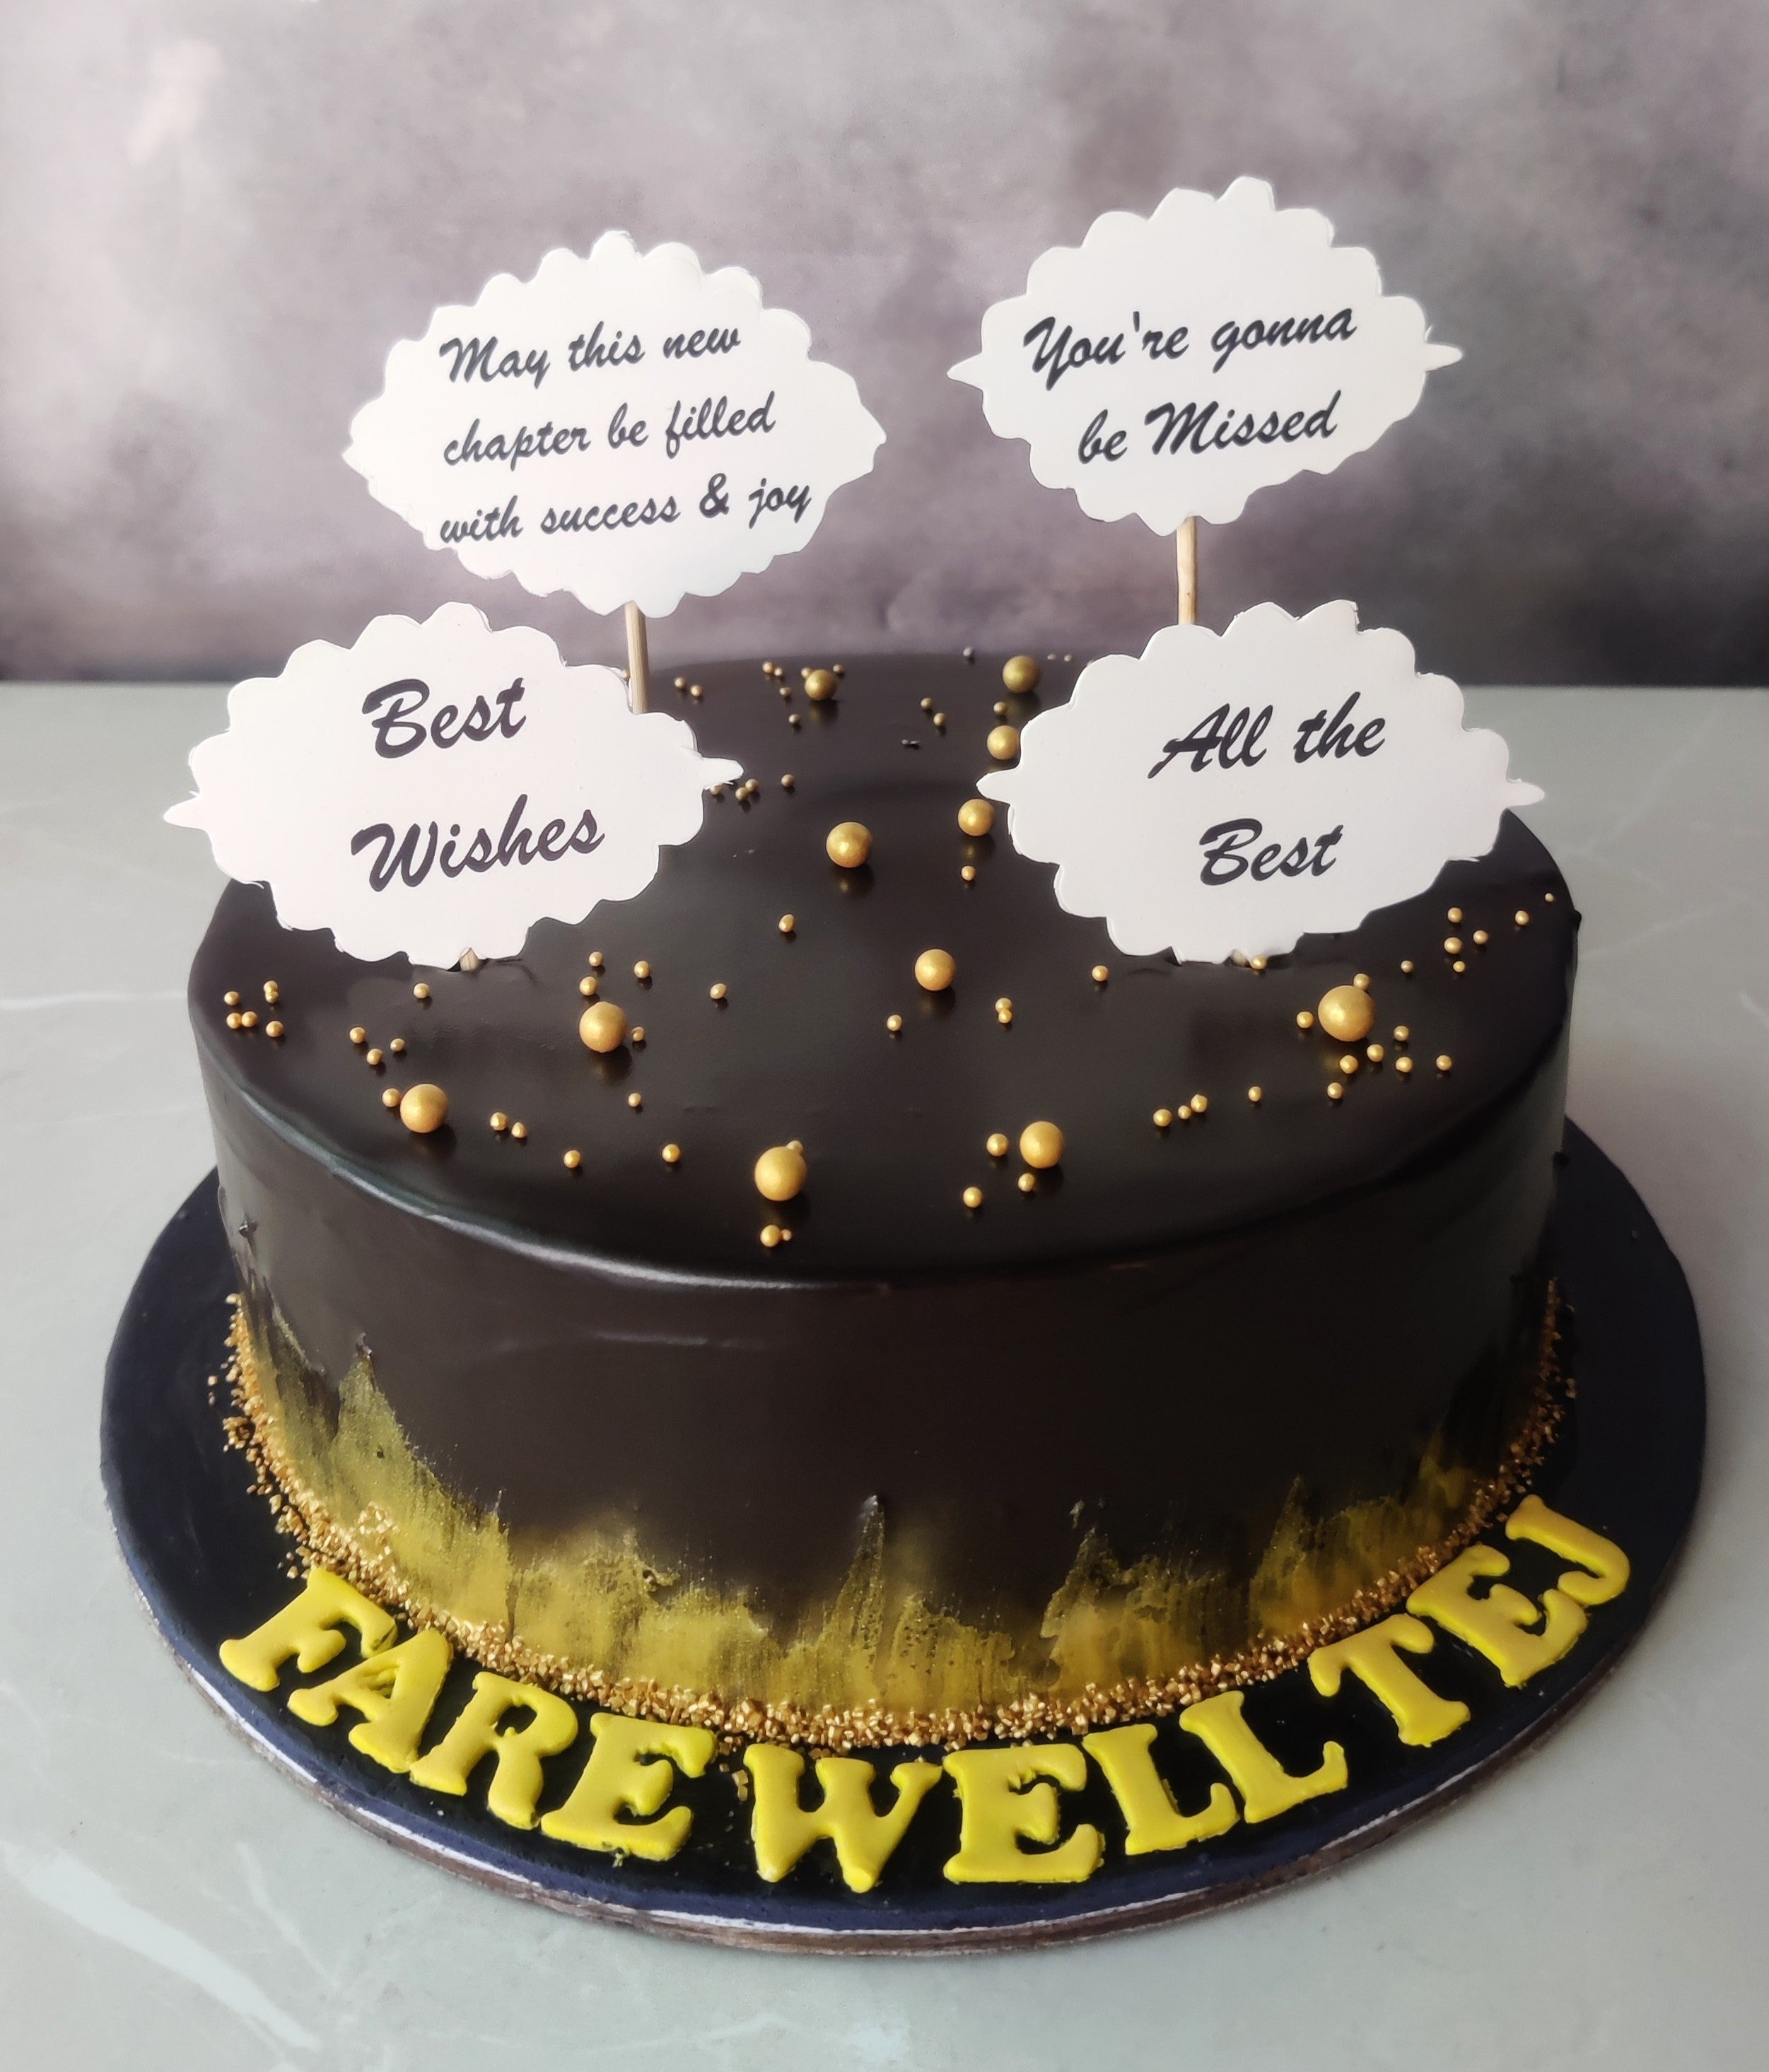 Farewell cake for a team lead from his... - Sweet Secret Spell | فيسبوك